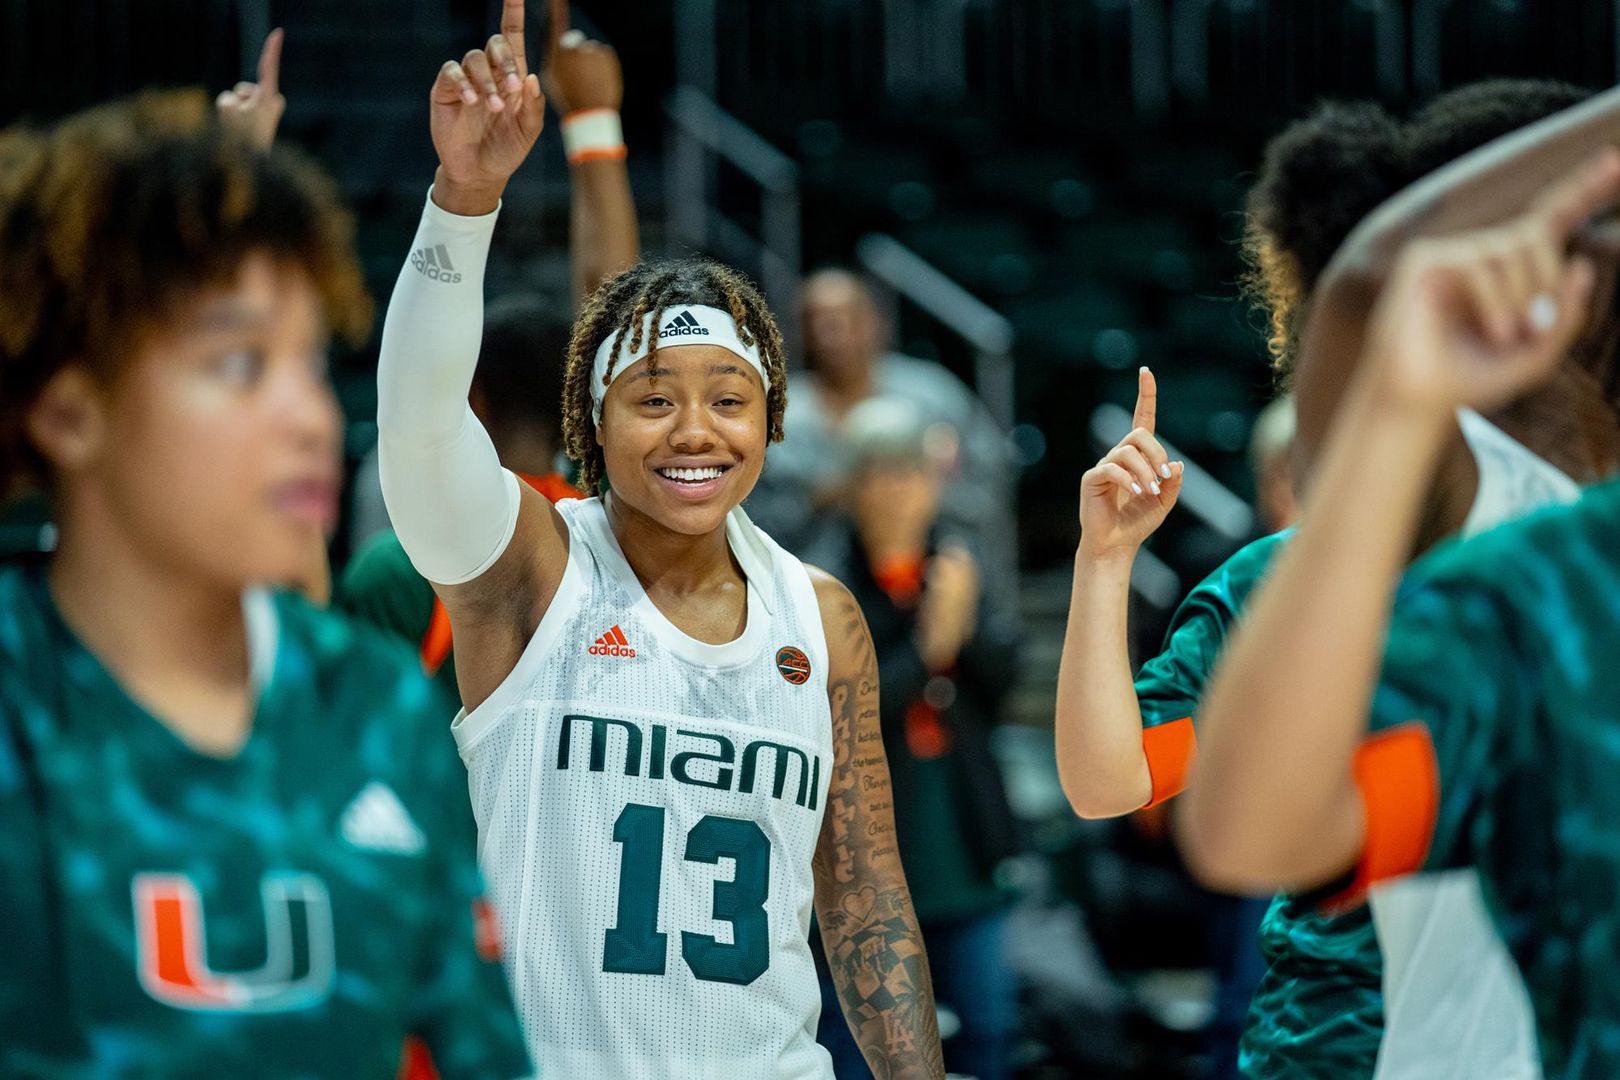 Canes Clash with Seminoles on Sunday